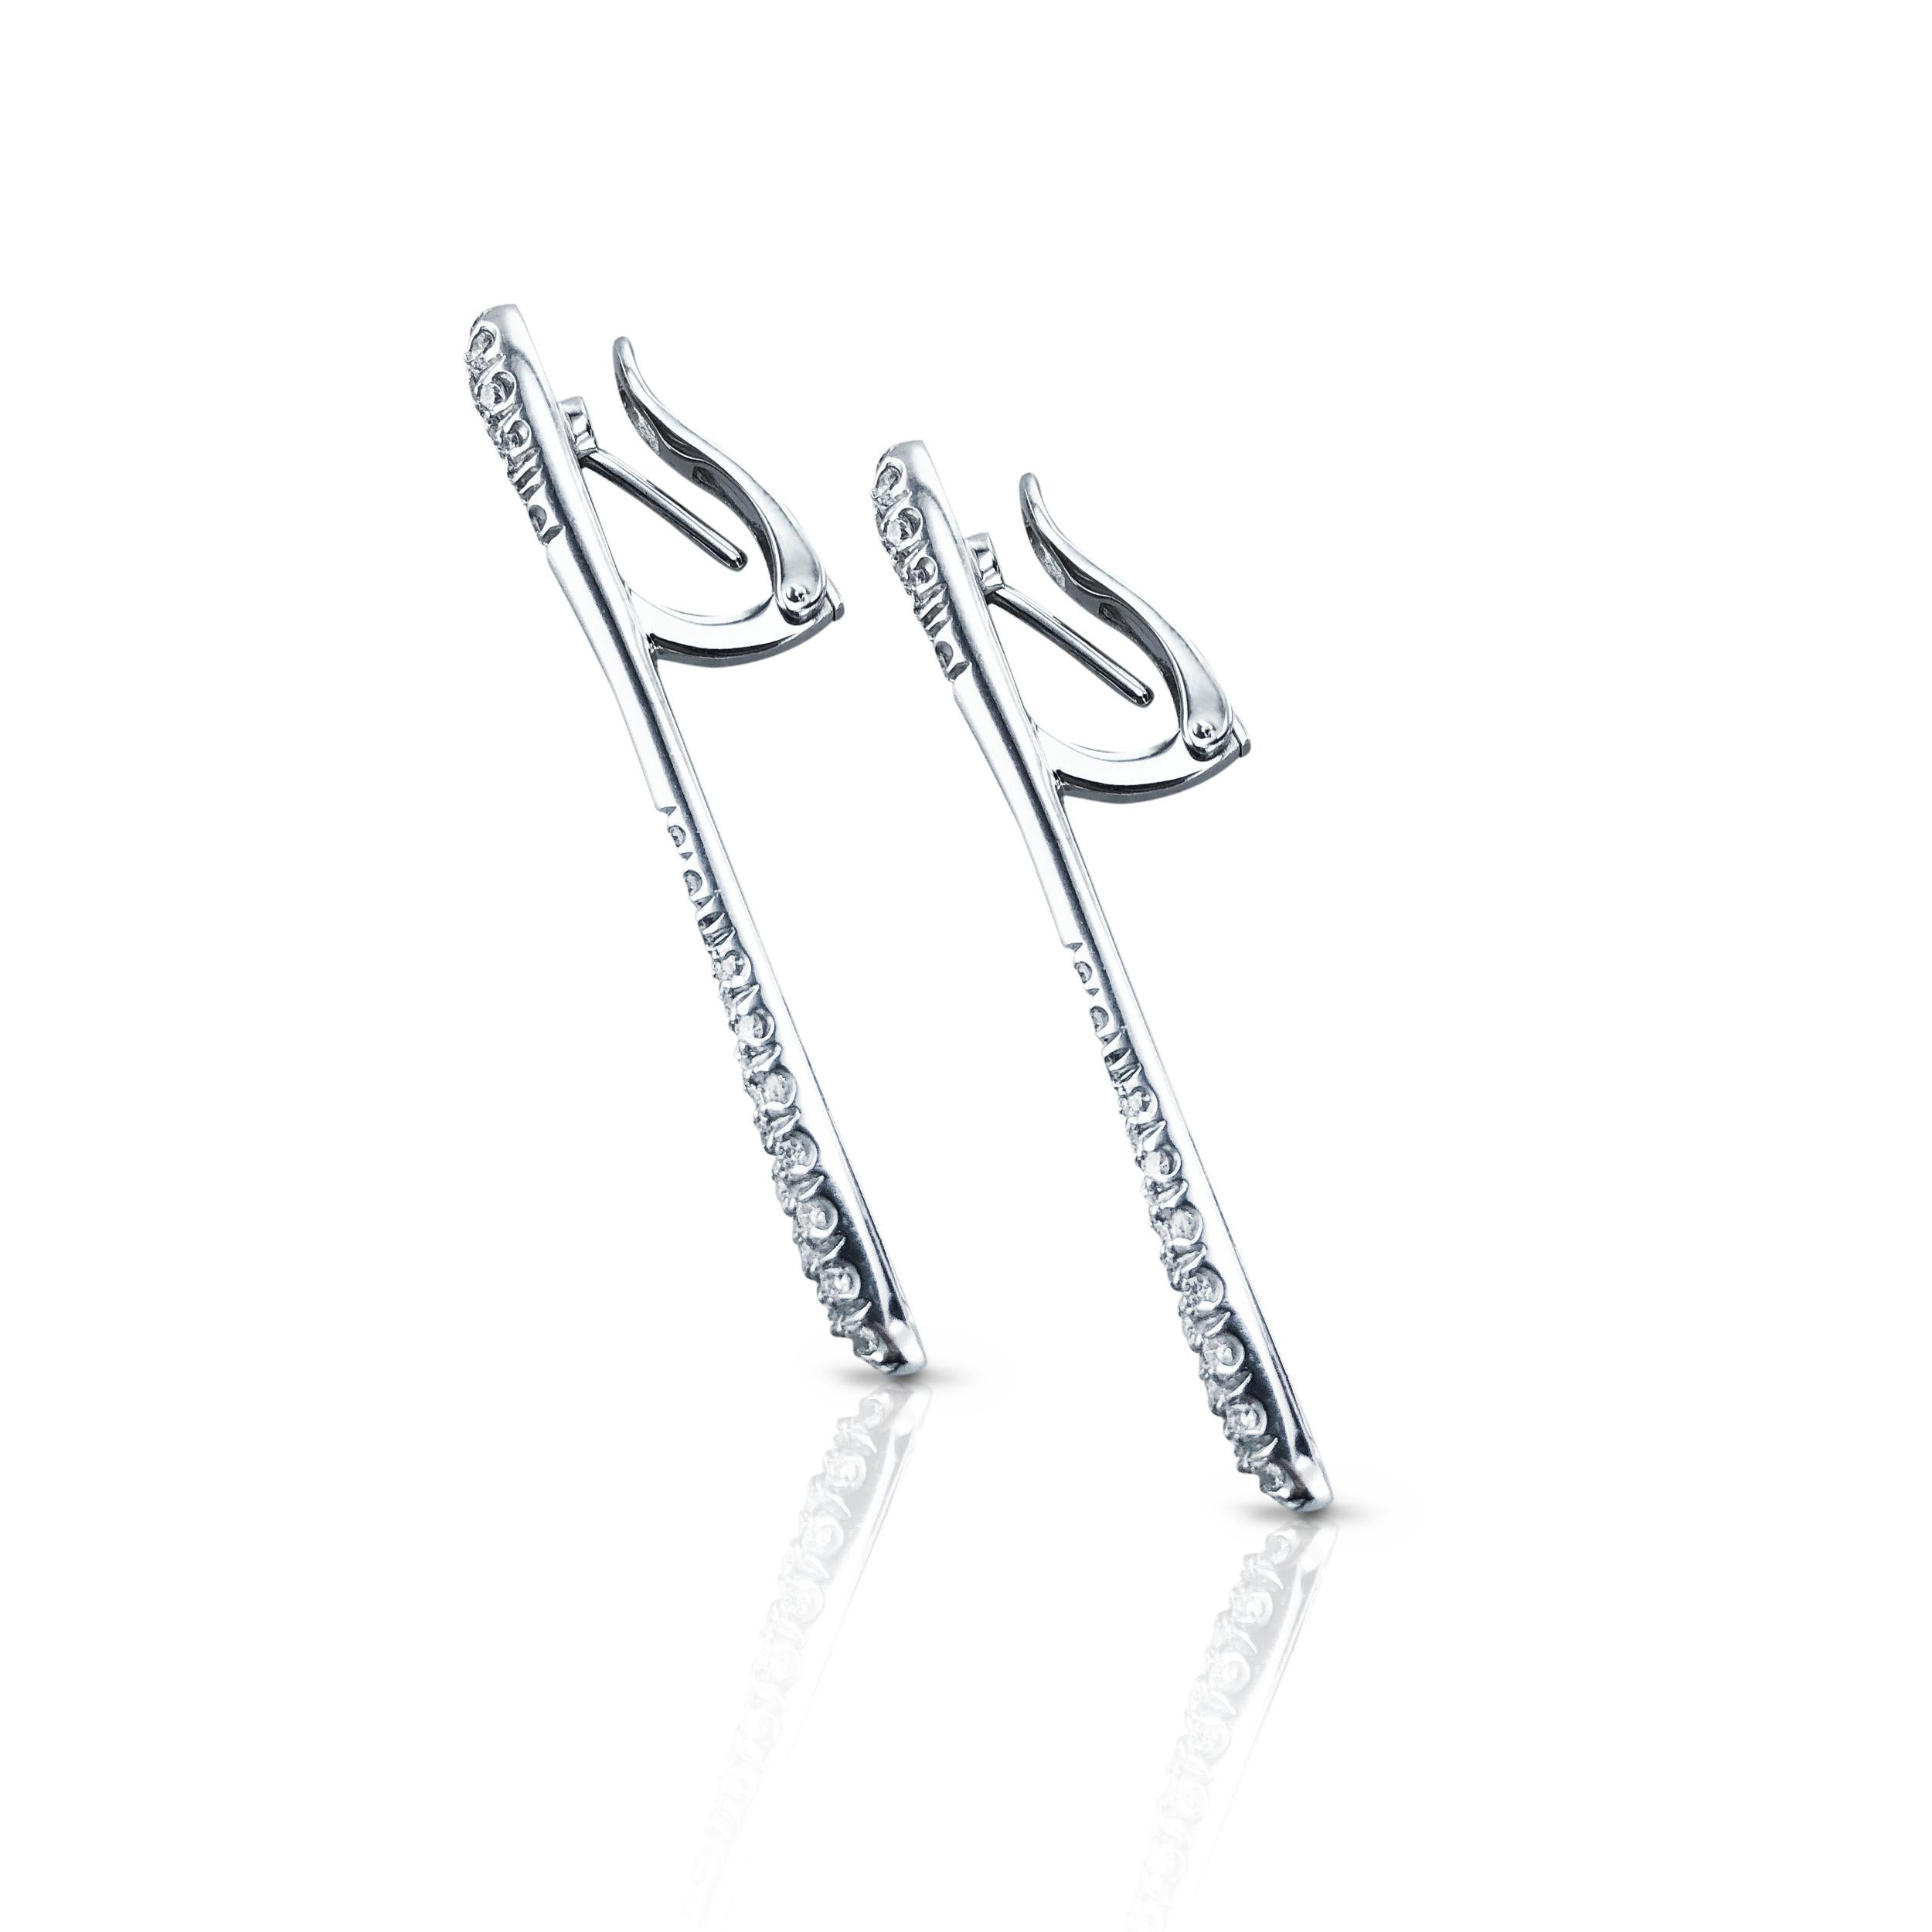 These half pave 0.80 carat vertical dangling diamond earrings, are beautifully set in 18kt white Gold with latch back clasp. 

Using the purest diamonds and excellent Italian craftsmanship. 
The earrings are designed by the famous and very skilled